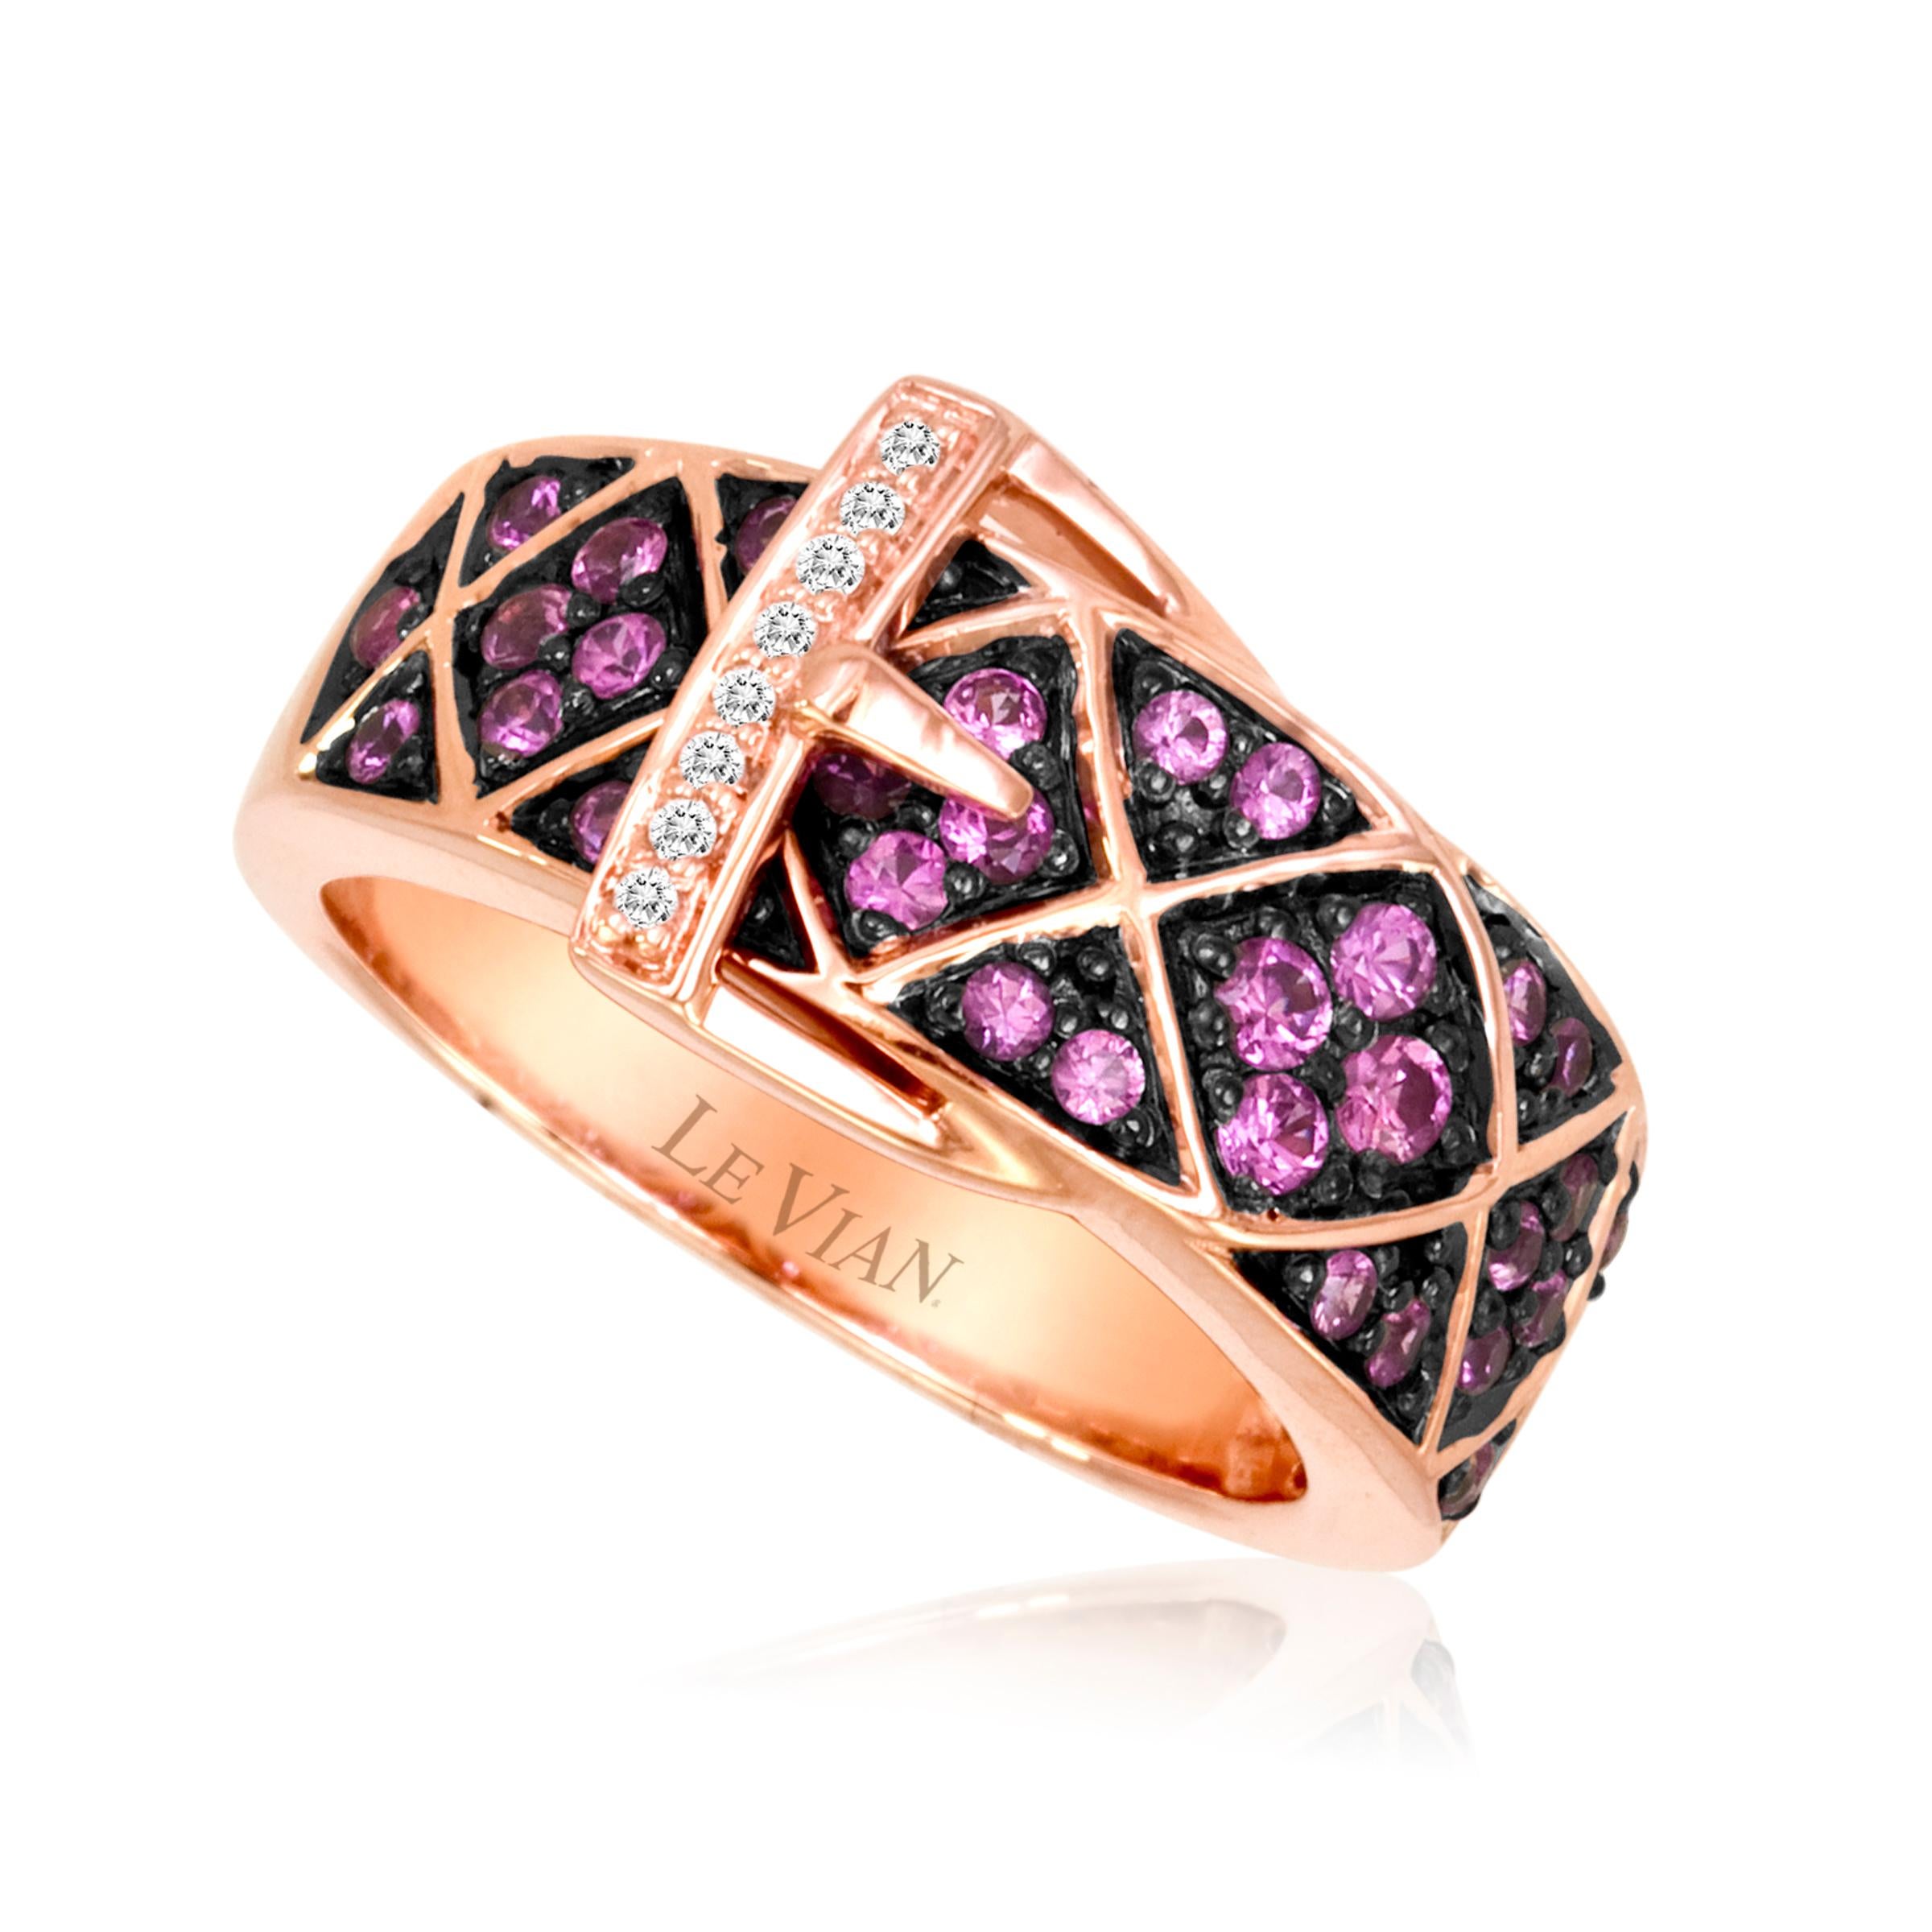 Grand Sample Sale Ring featuring 5/8 cts. Bubble Gum Pink Sapphire™, 1/20 cts. Vanilla Diamonds®  set in 14K Strawberry Gold®
